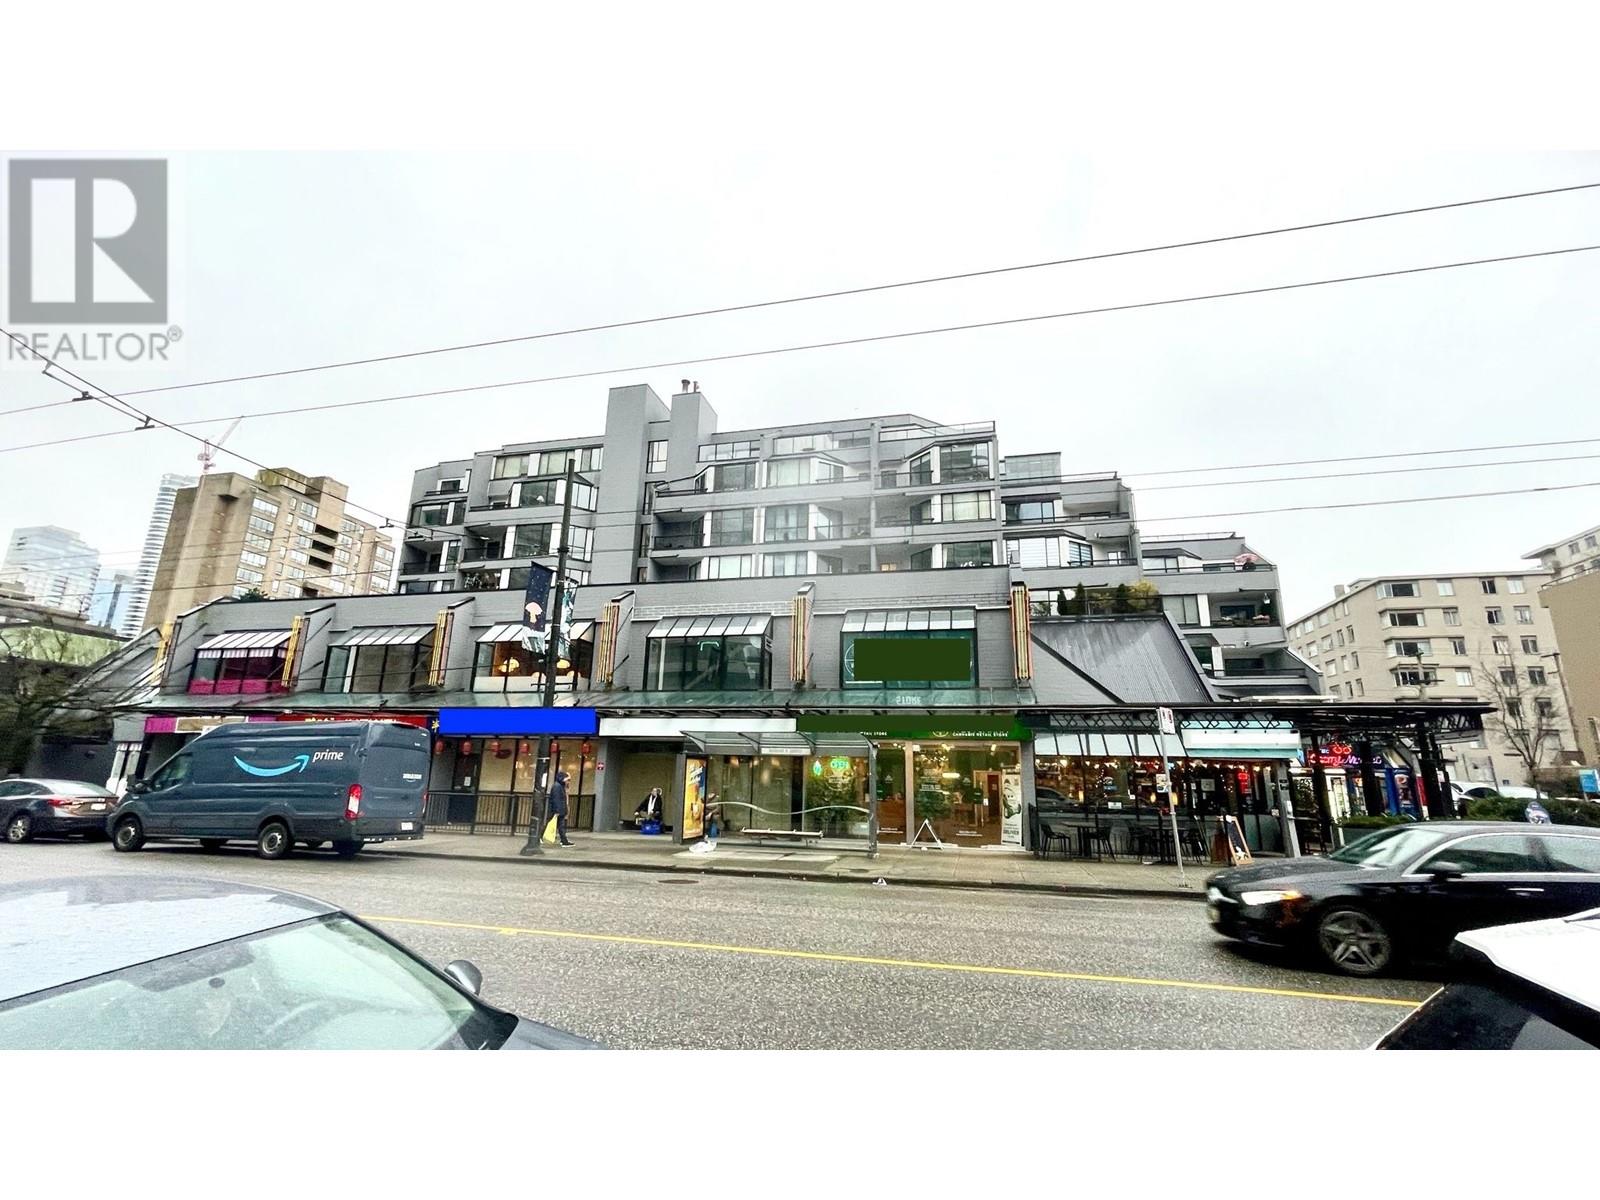 For sale: 1284 ROBSON STREET, Vancouver, British Columbia V6E1C1